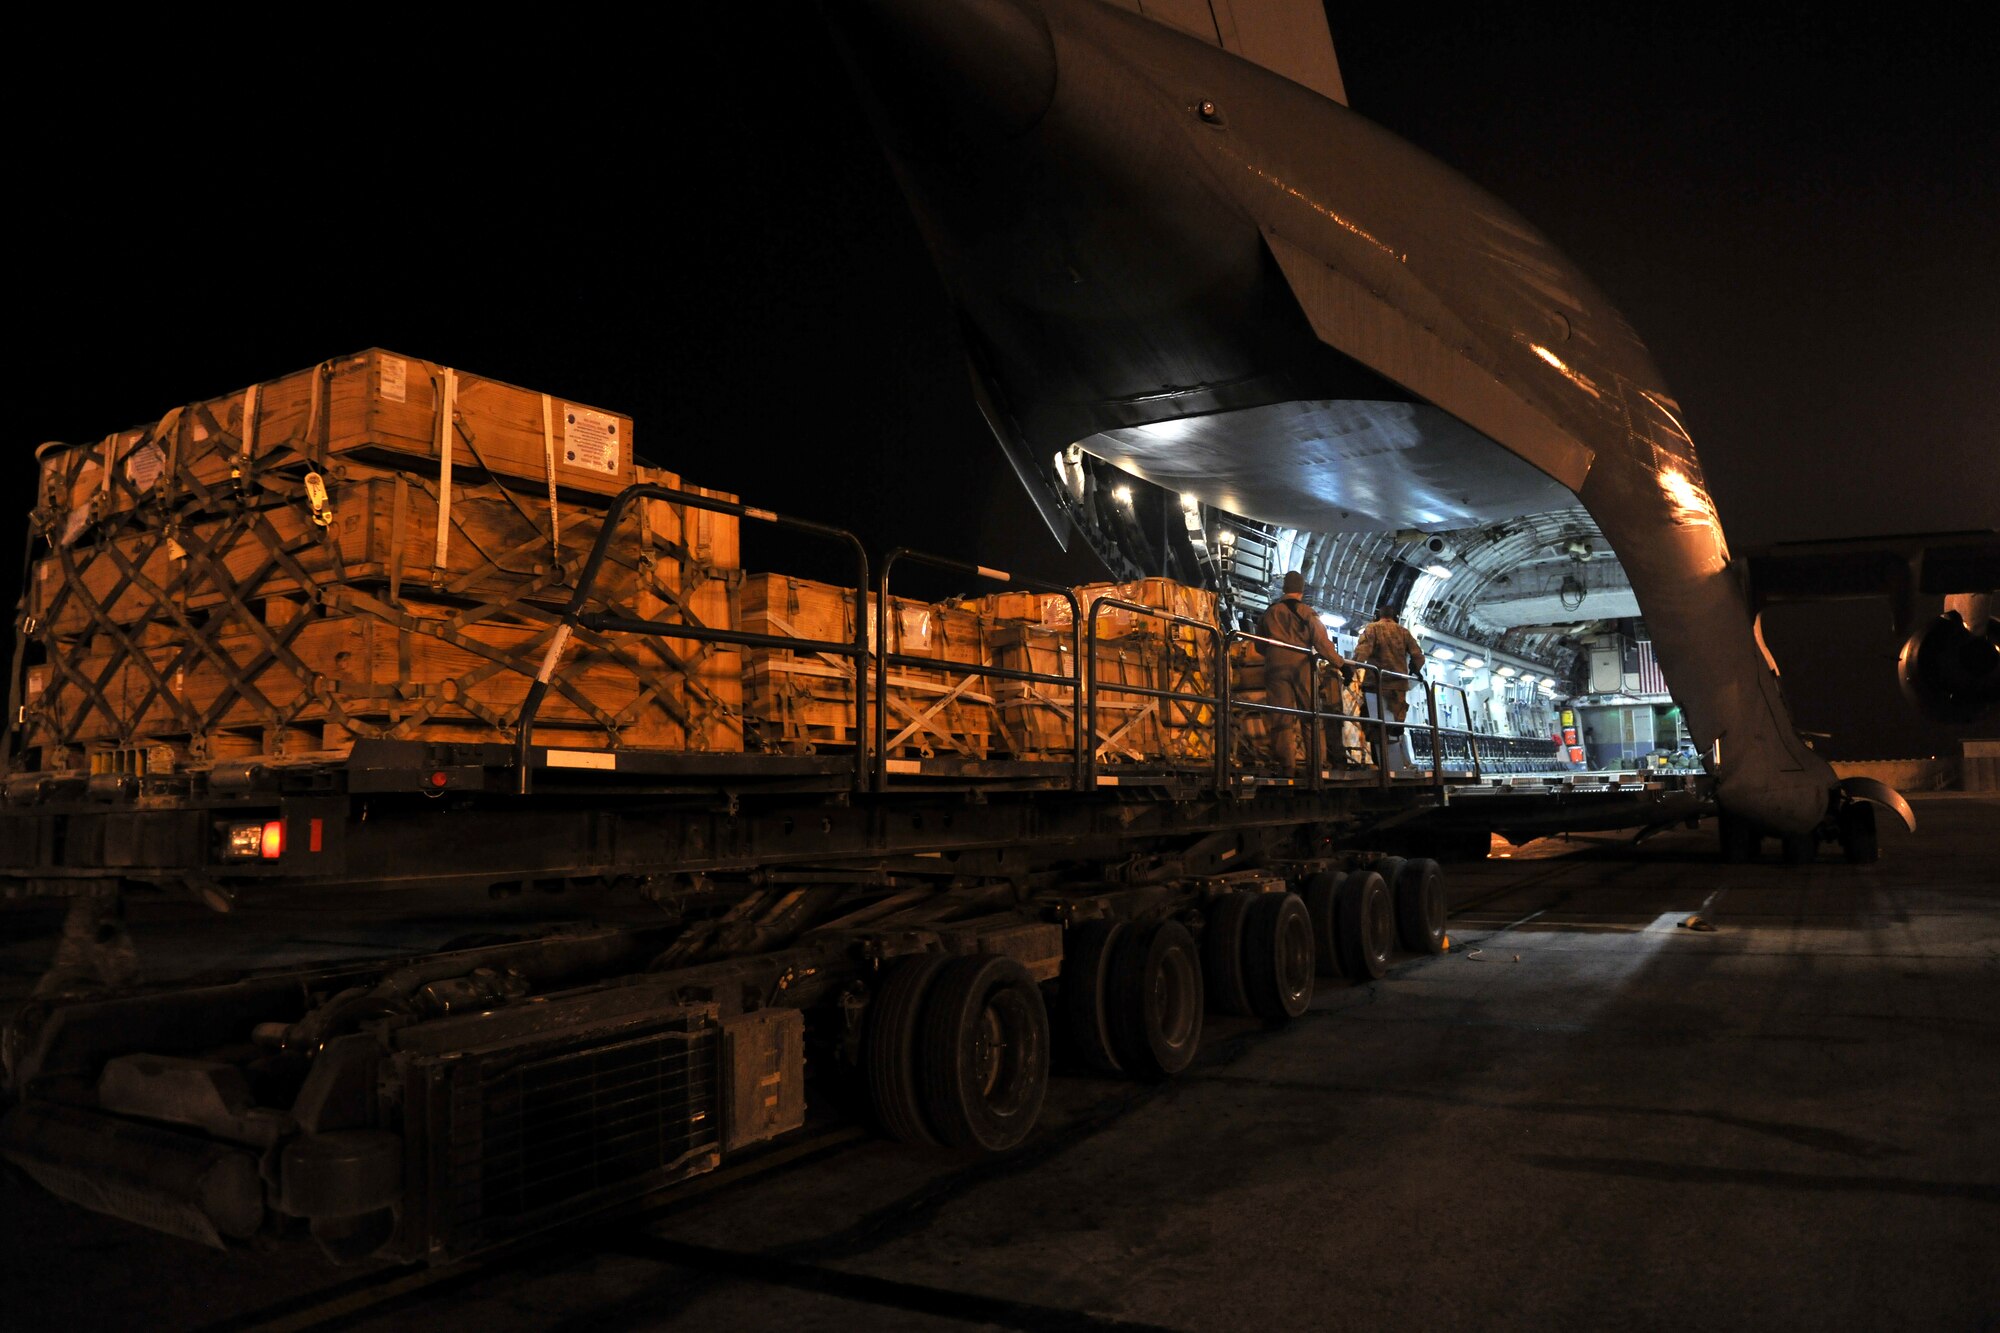 Airmen from 455th Expeditionary Aerial Port Squadron, Detachment 3, load pallets onto a C-17 Globemaster III at Camp Marmal, Afghanistan, Jan 30, 2013. Airmen belonging to the 455th EAPS are charged with unloading and loading every aircraft carrying supplies or personnel into and out of Camp Marmal supporting the International Security Assistance Force Regional Command-North’s transportation mission. (U.S. Air Force photo/Senior Airman Chris Willis)